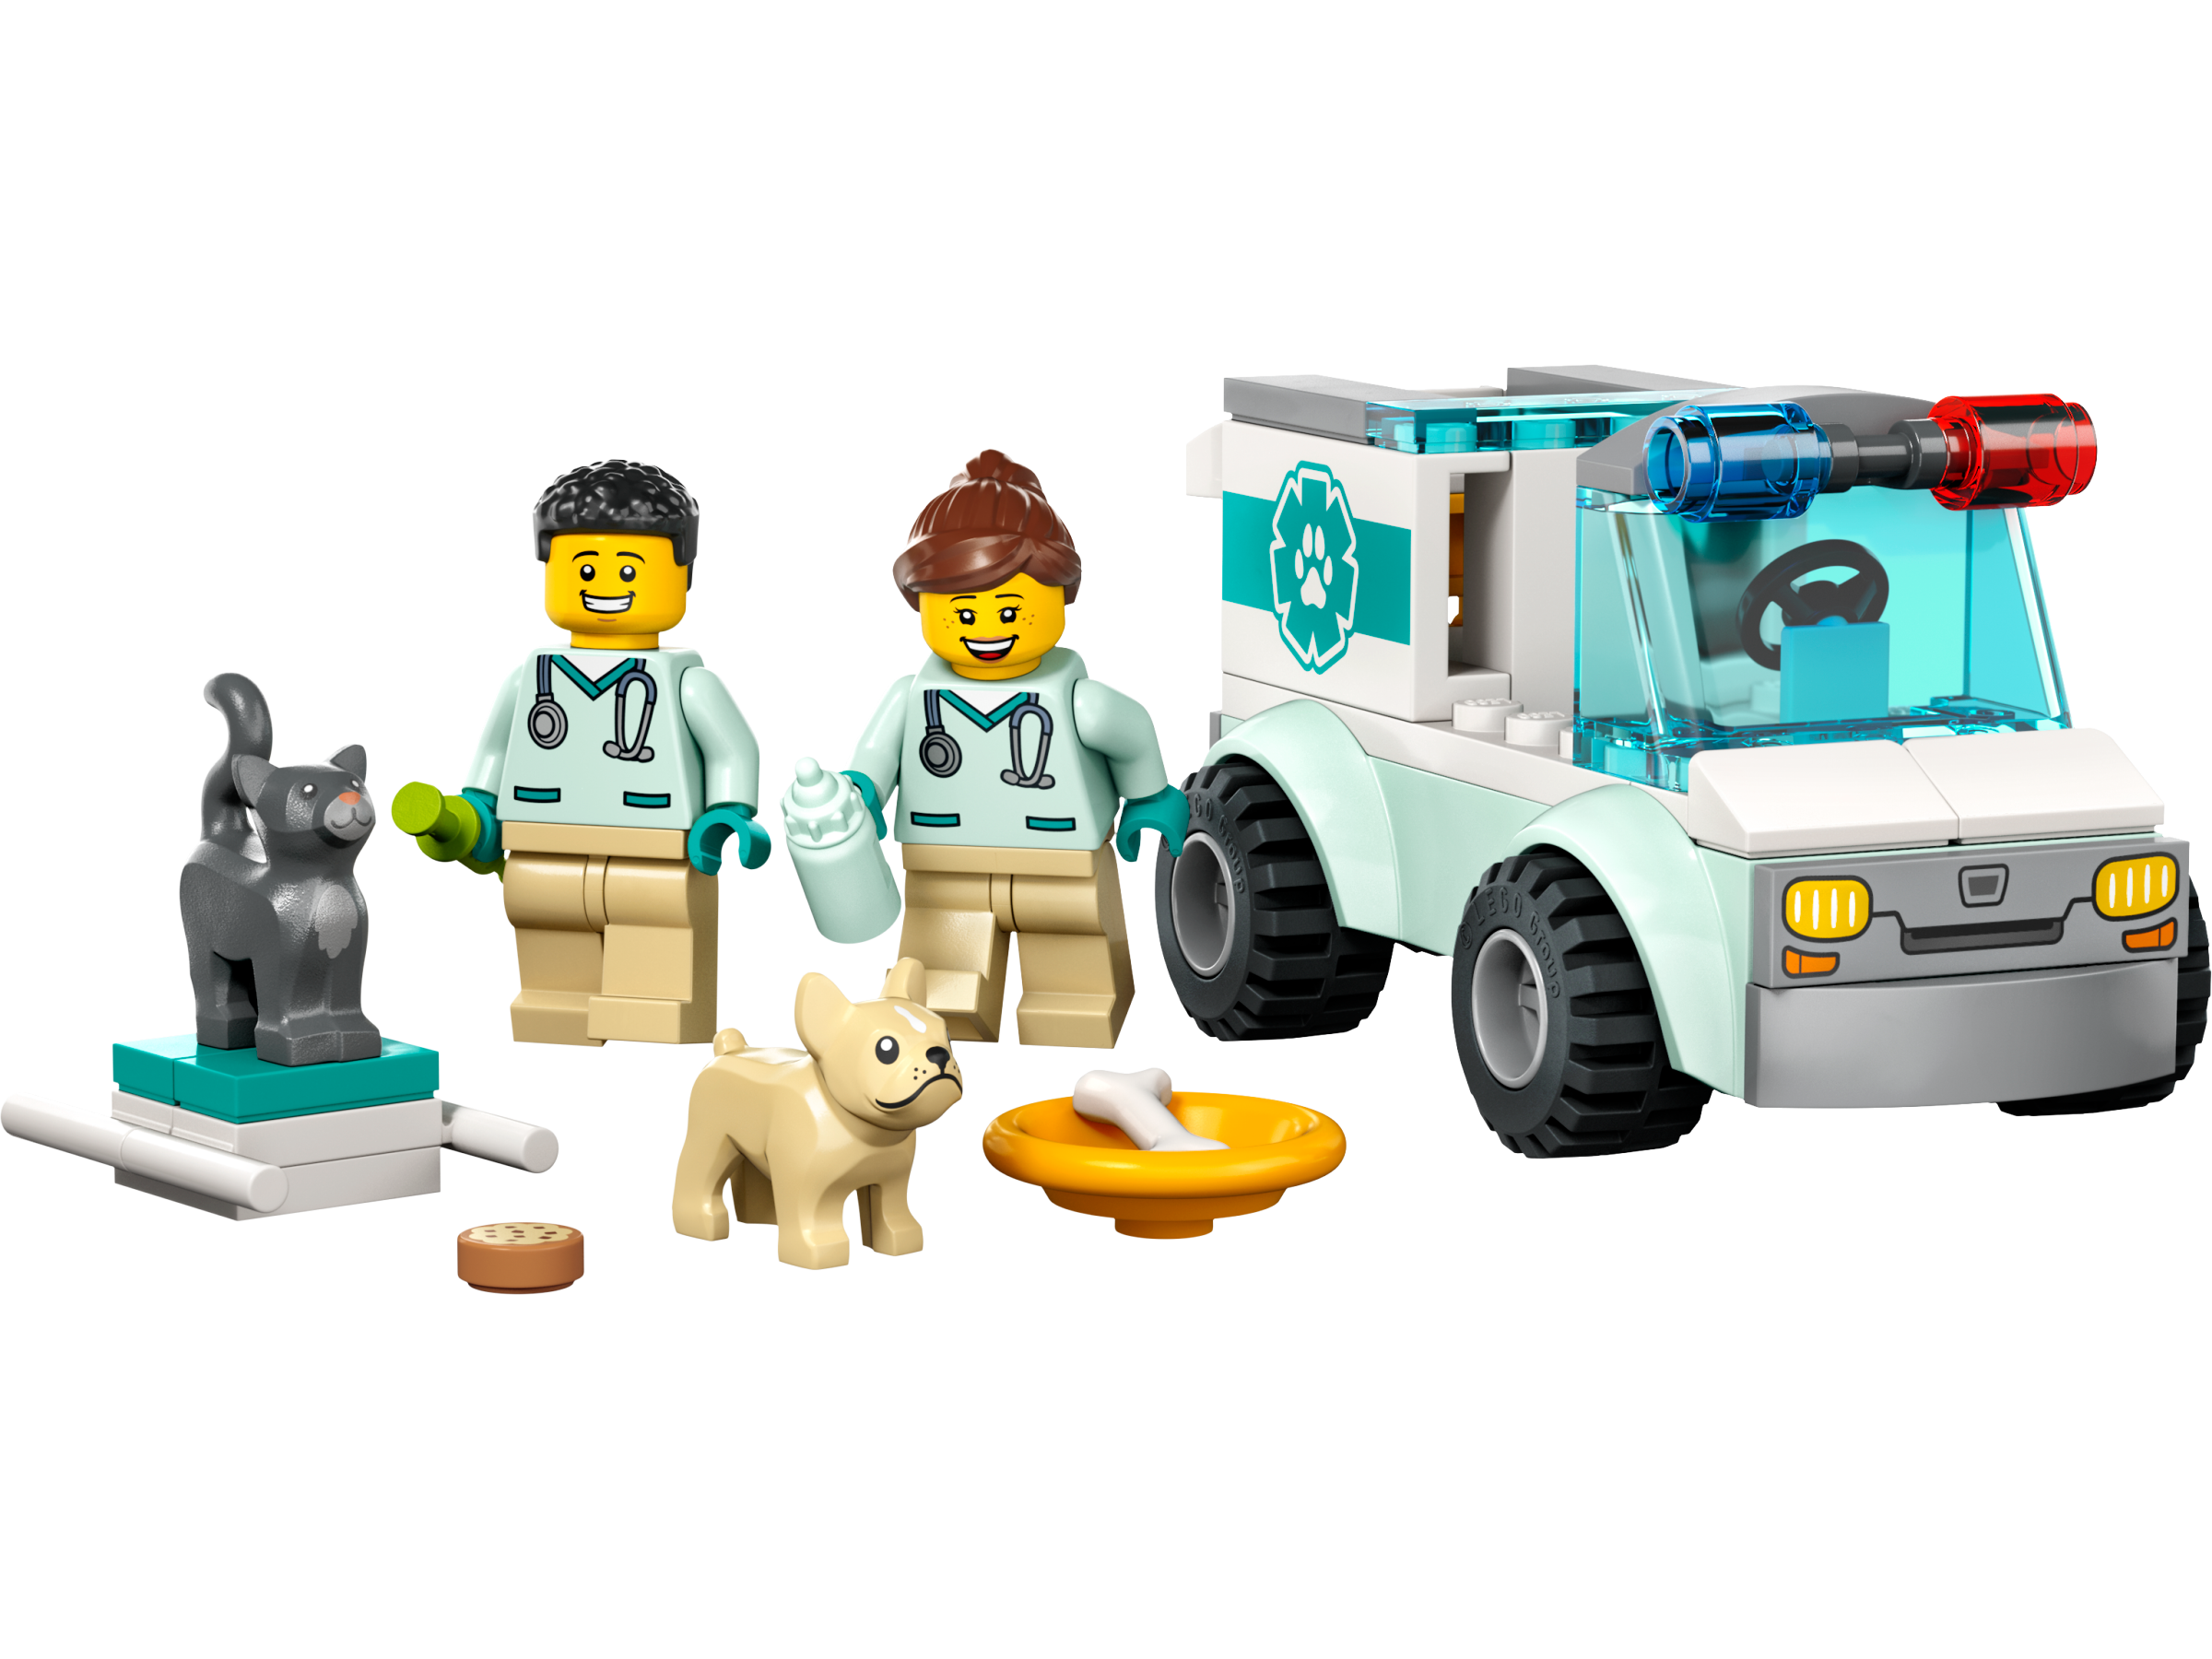 Rescue | City | Buy online at Official LEGO® Shop US